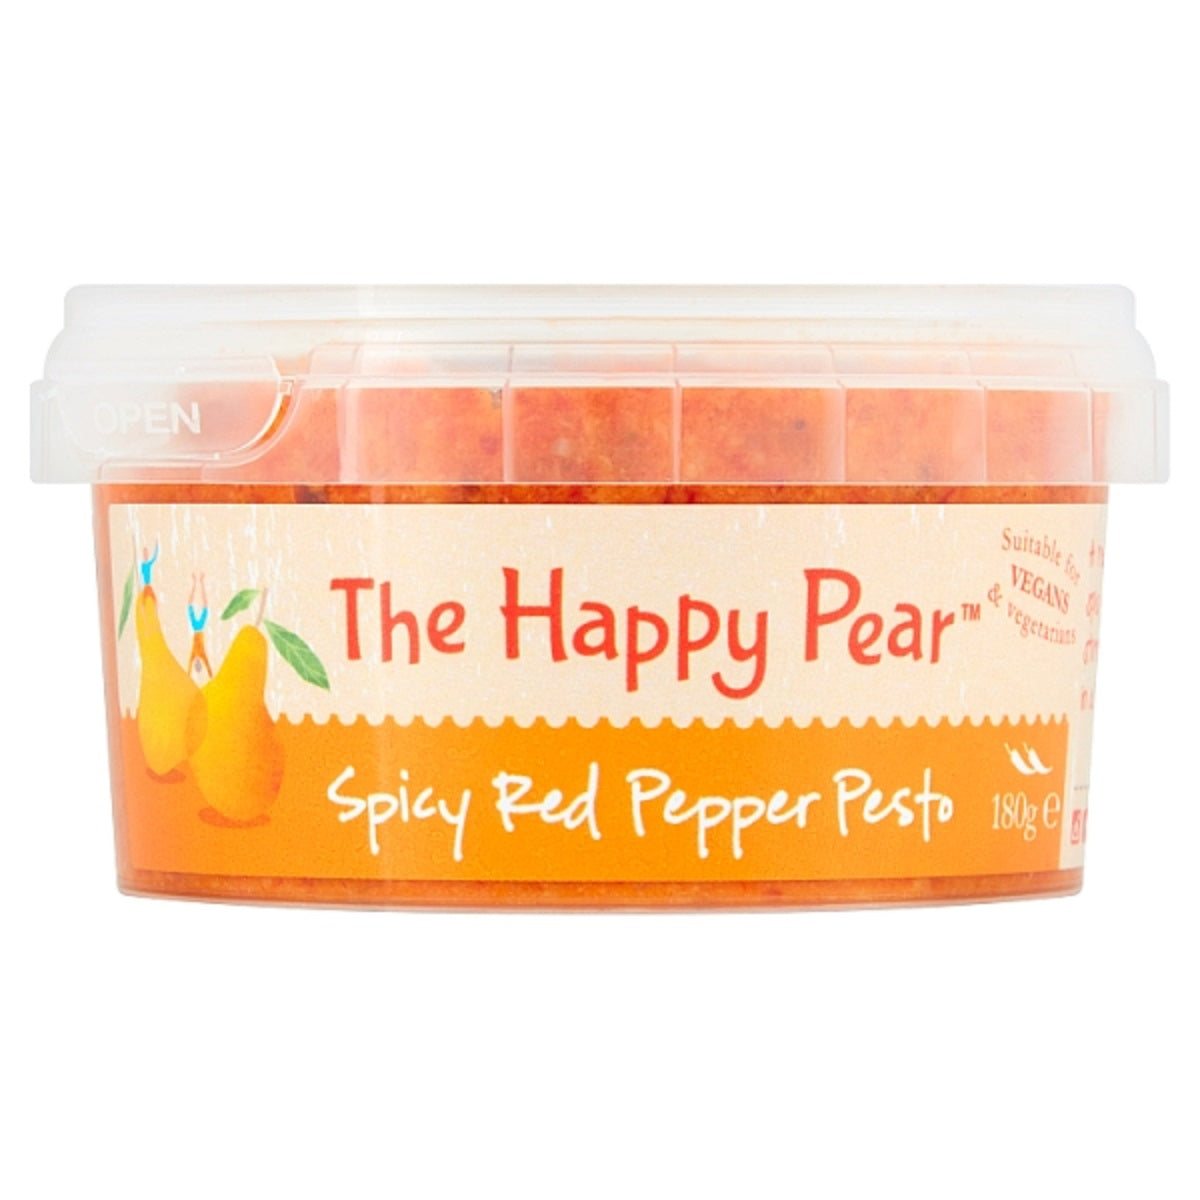 The Happy Pear Spicy Red Pepper Pesto 150g